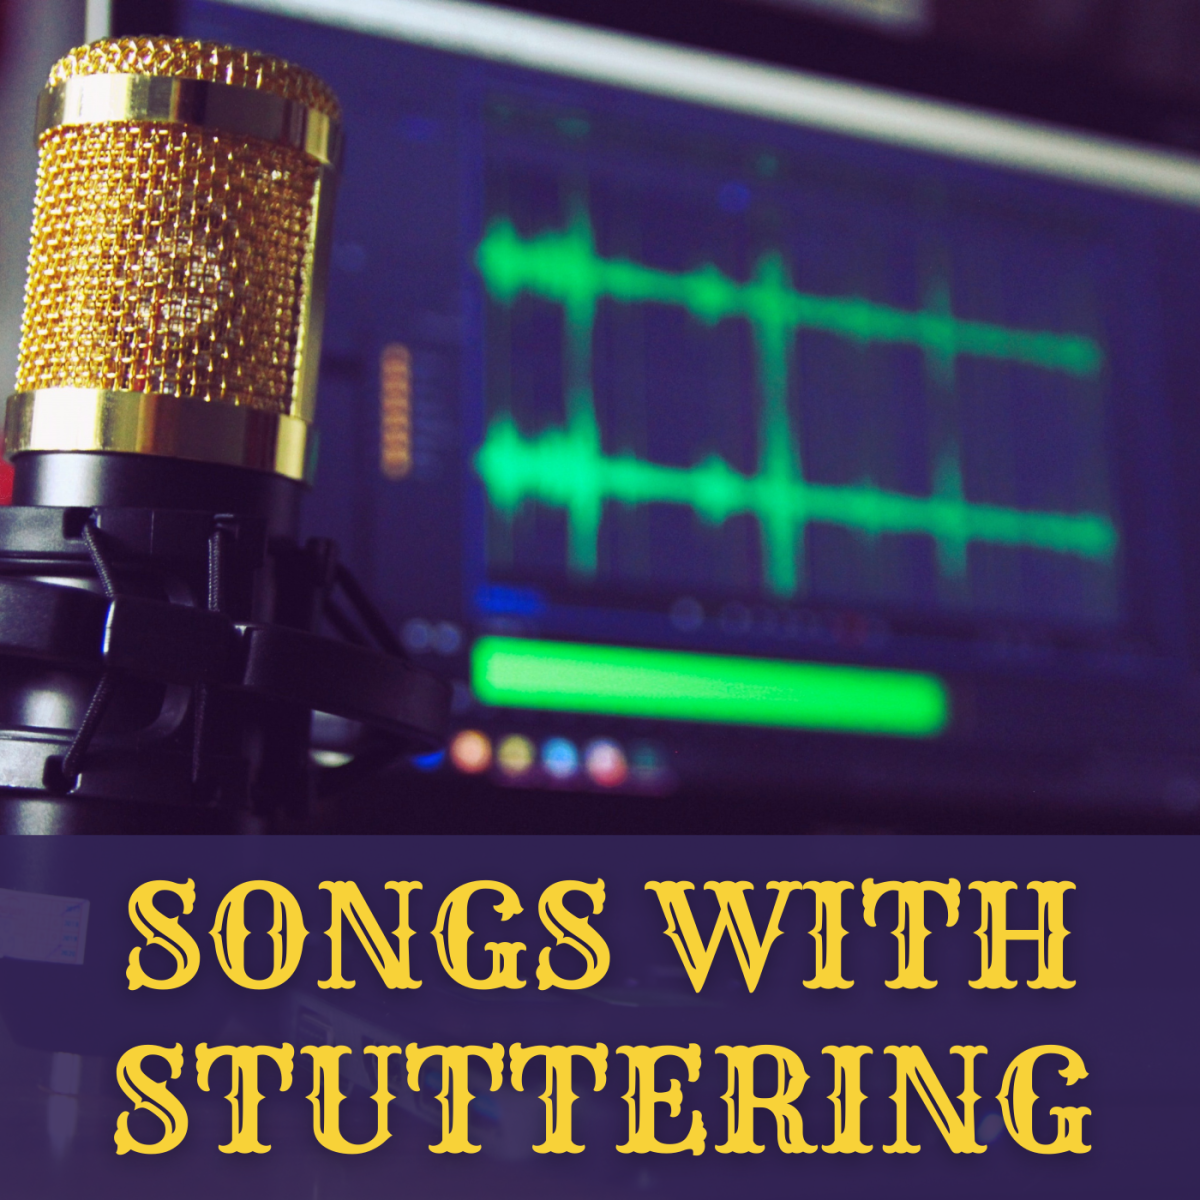 82 Songs With Stuttering